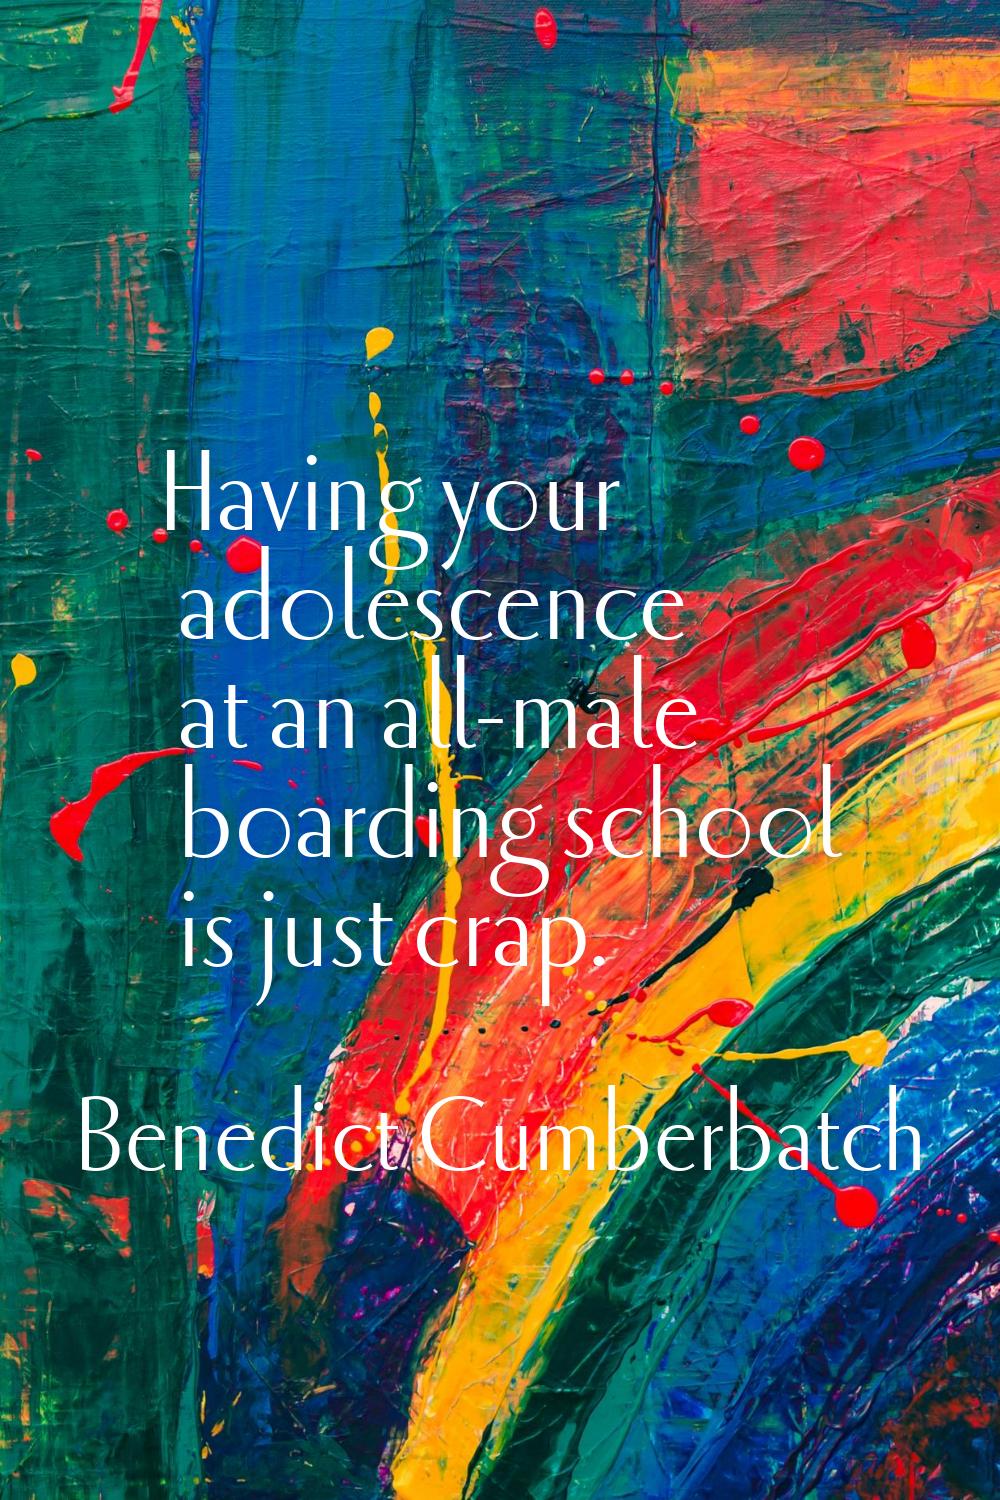 Having your adolescence at an all-male boarding school is just crap.